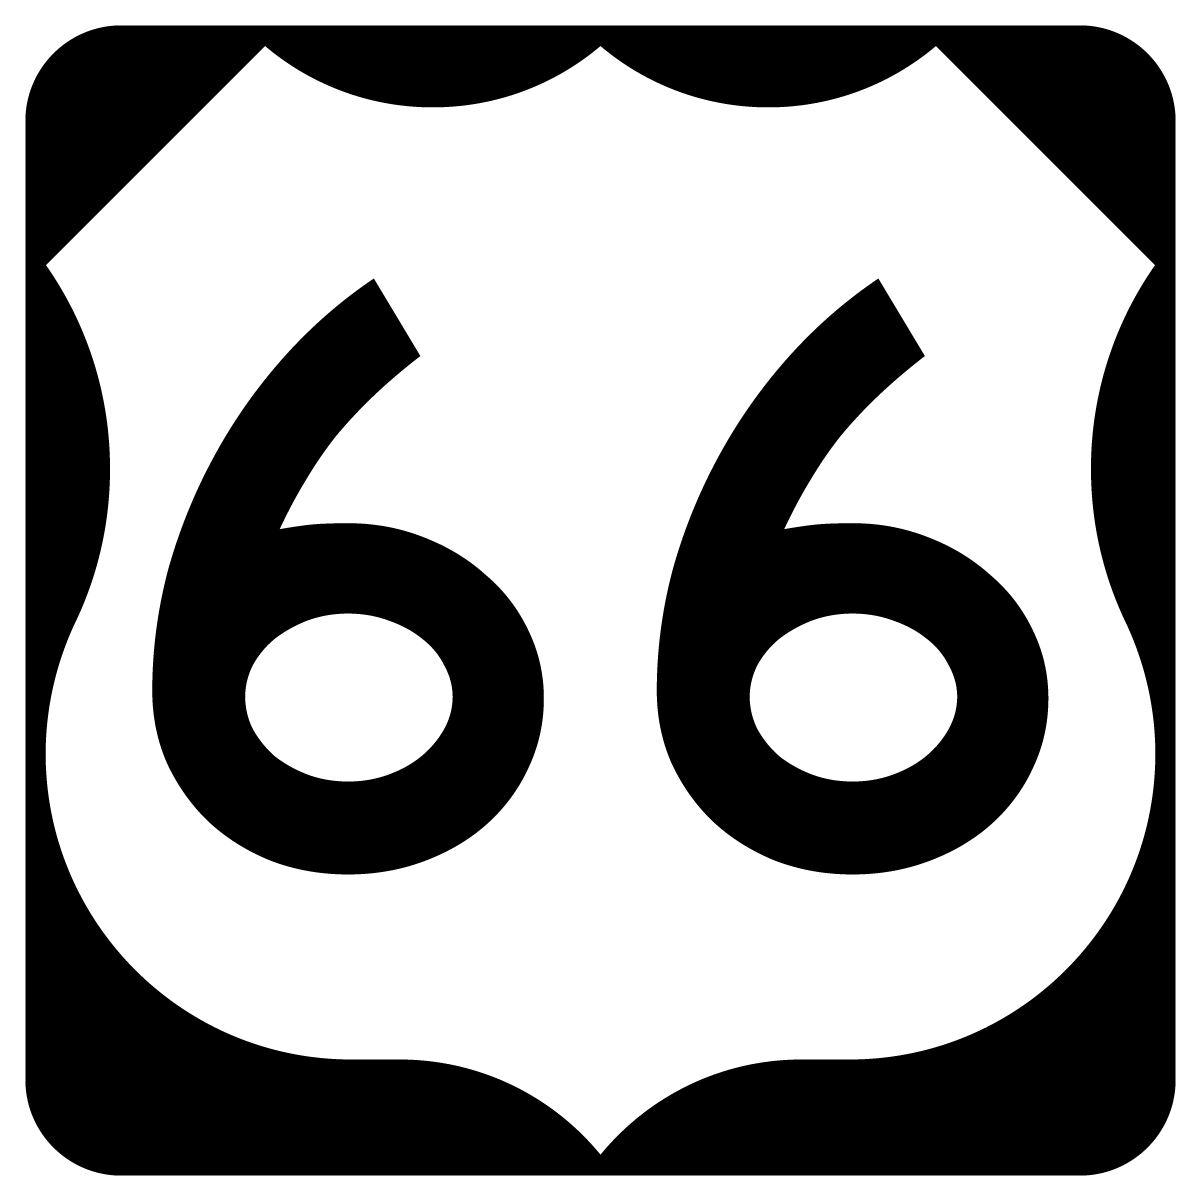 Route 66 Download